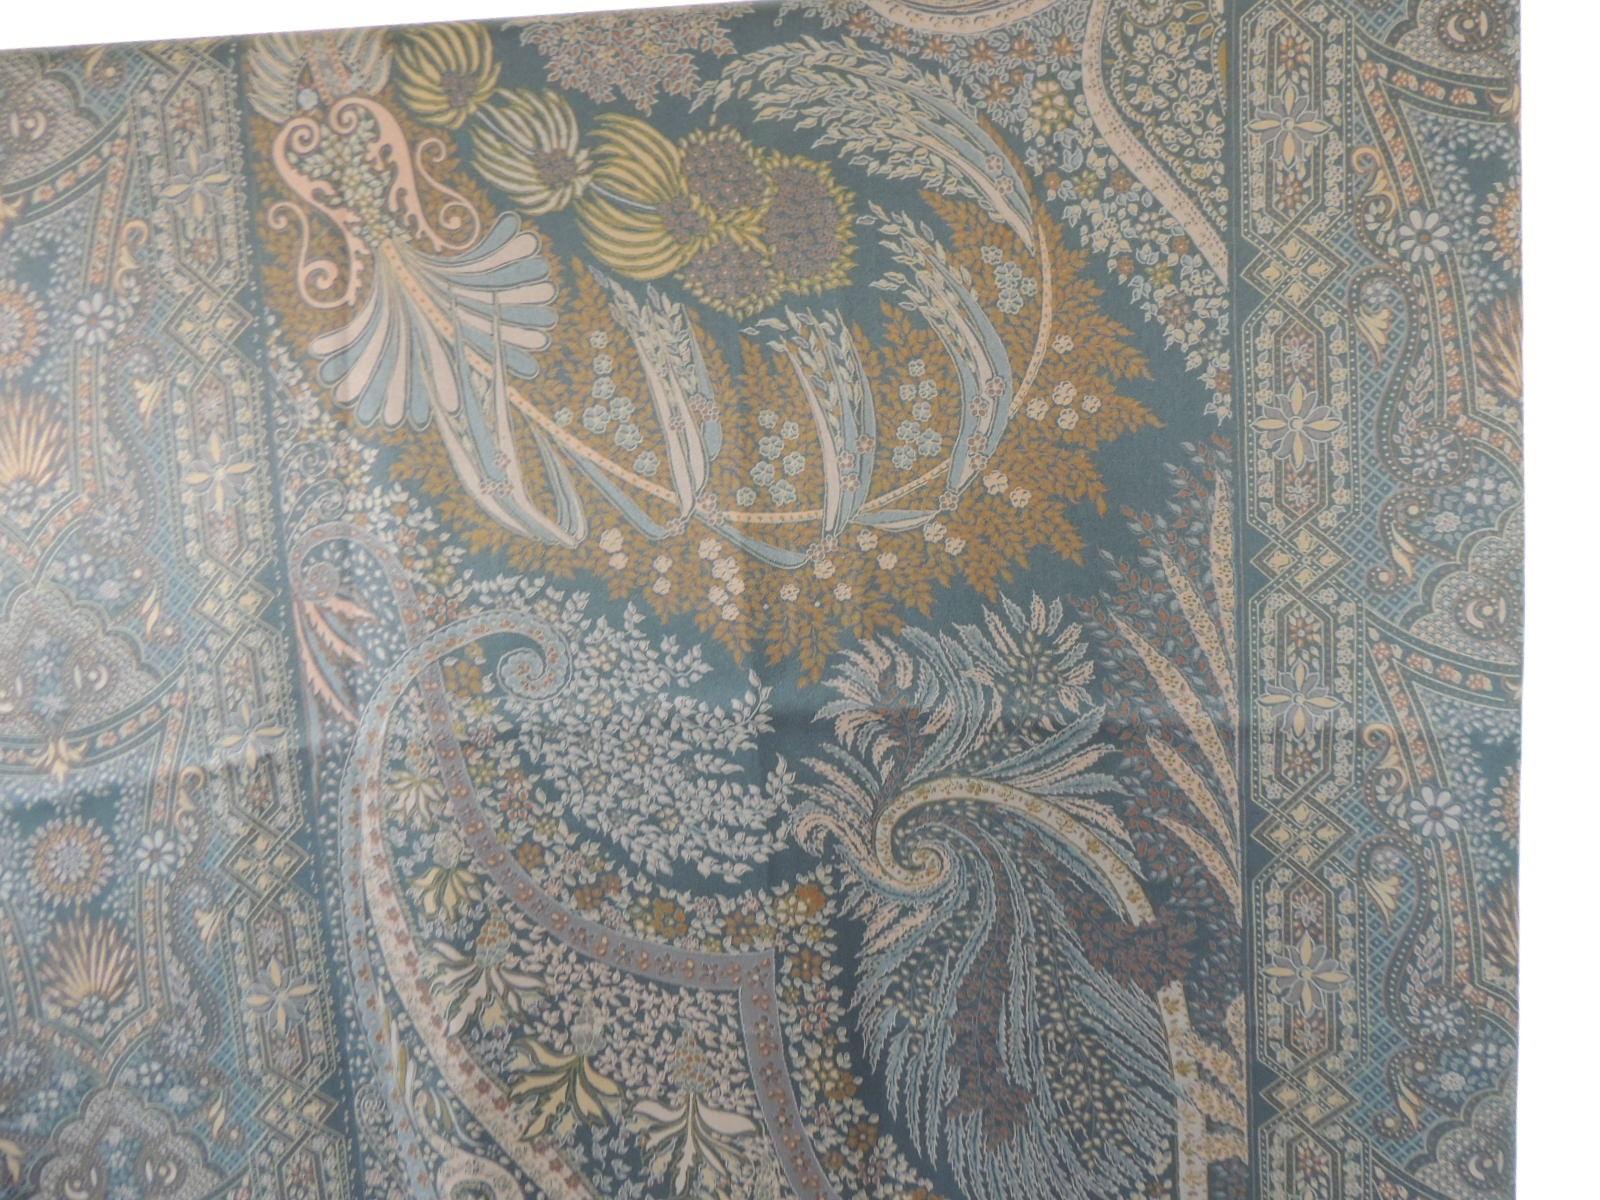 Large acetate square paisley scarf/shawl.
In shades of gold, blue and grey.
Size: 52